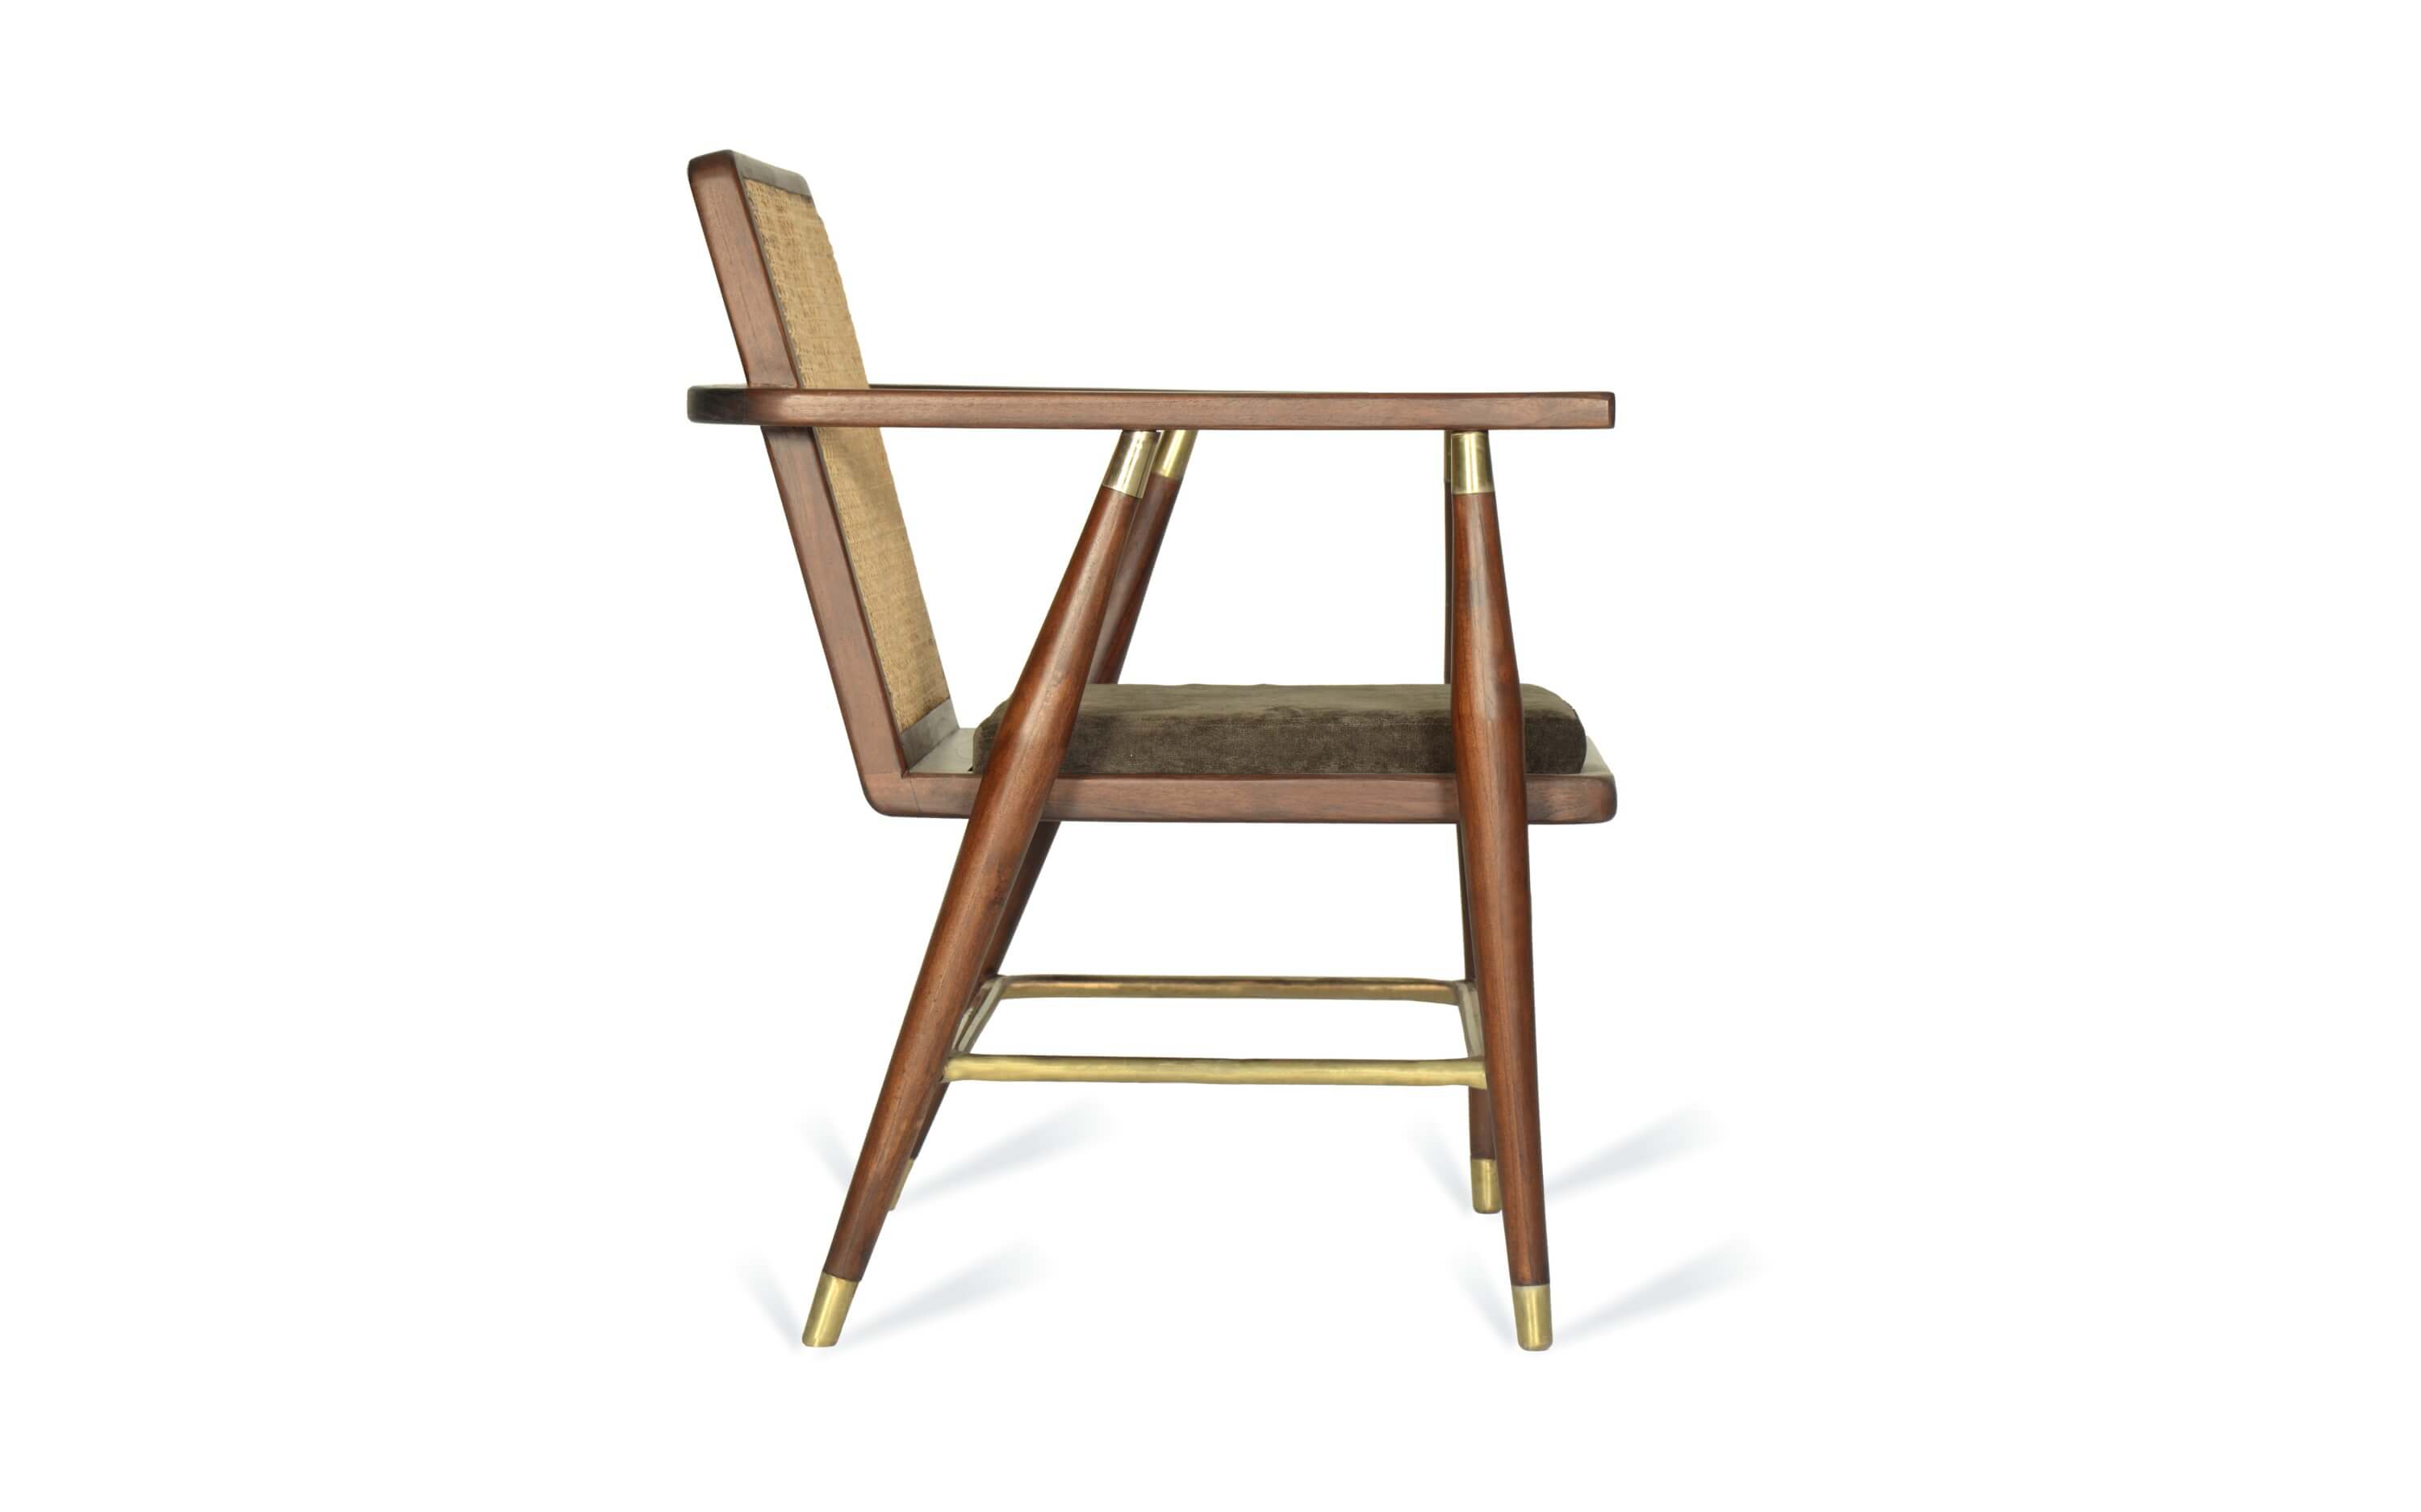 Navah Lounge Chair with Hand Support - Orange Tree Home Pvt. Ltd.